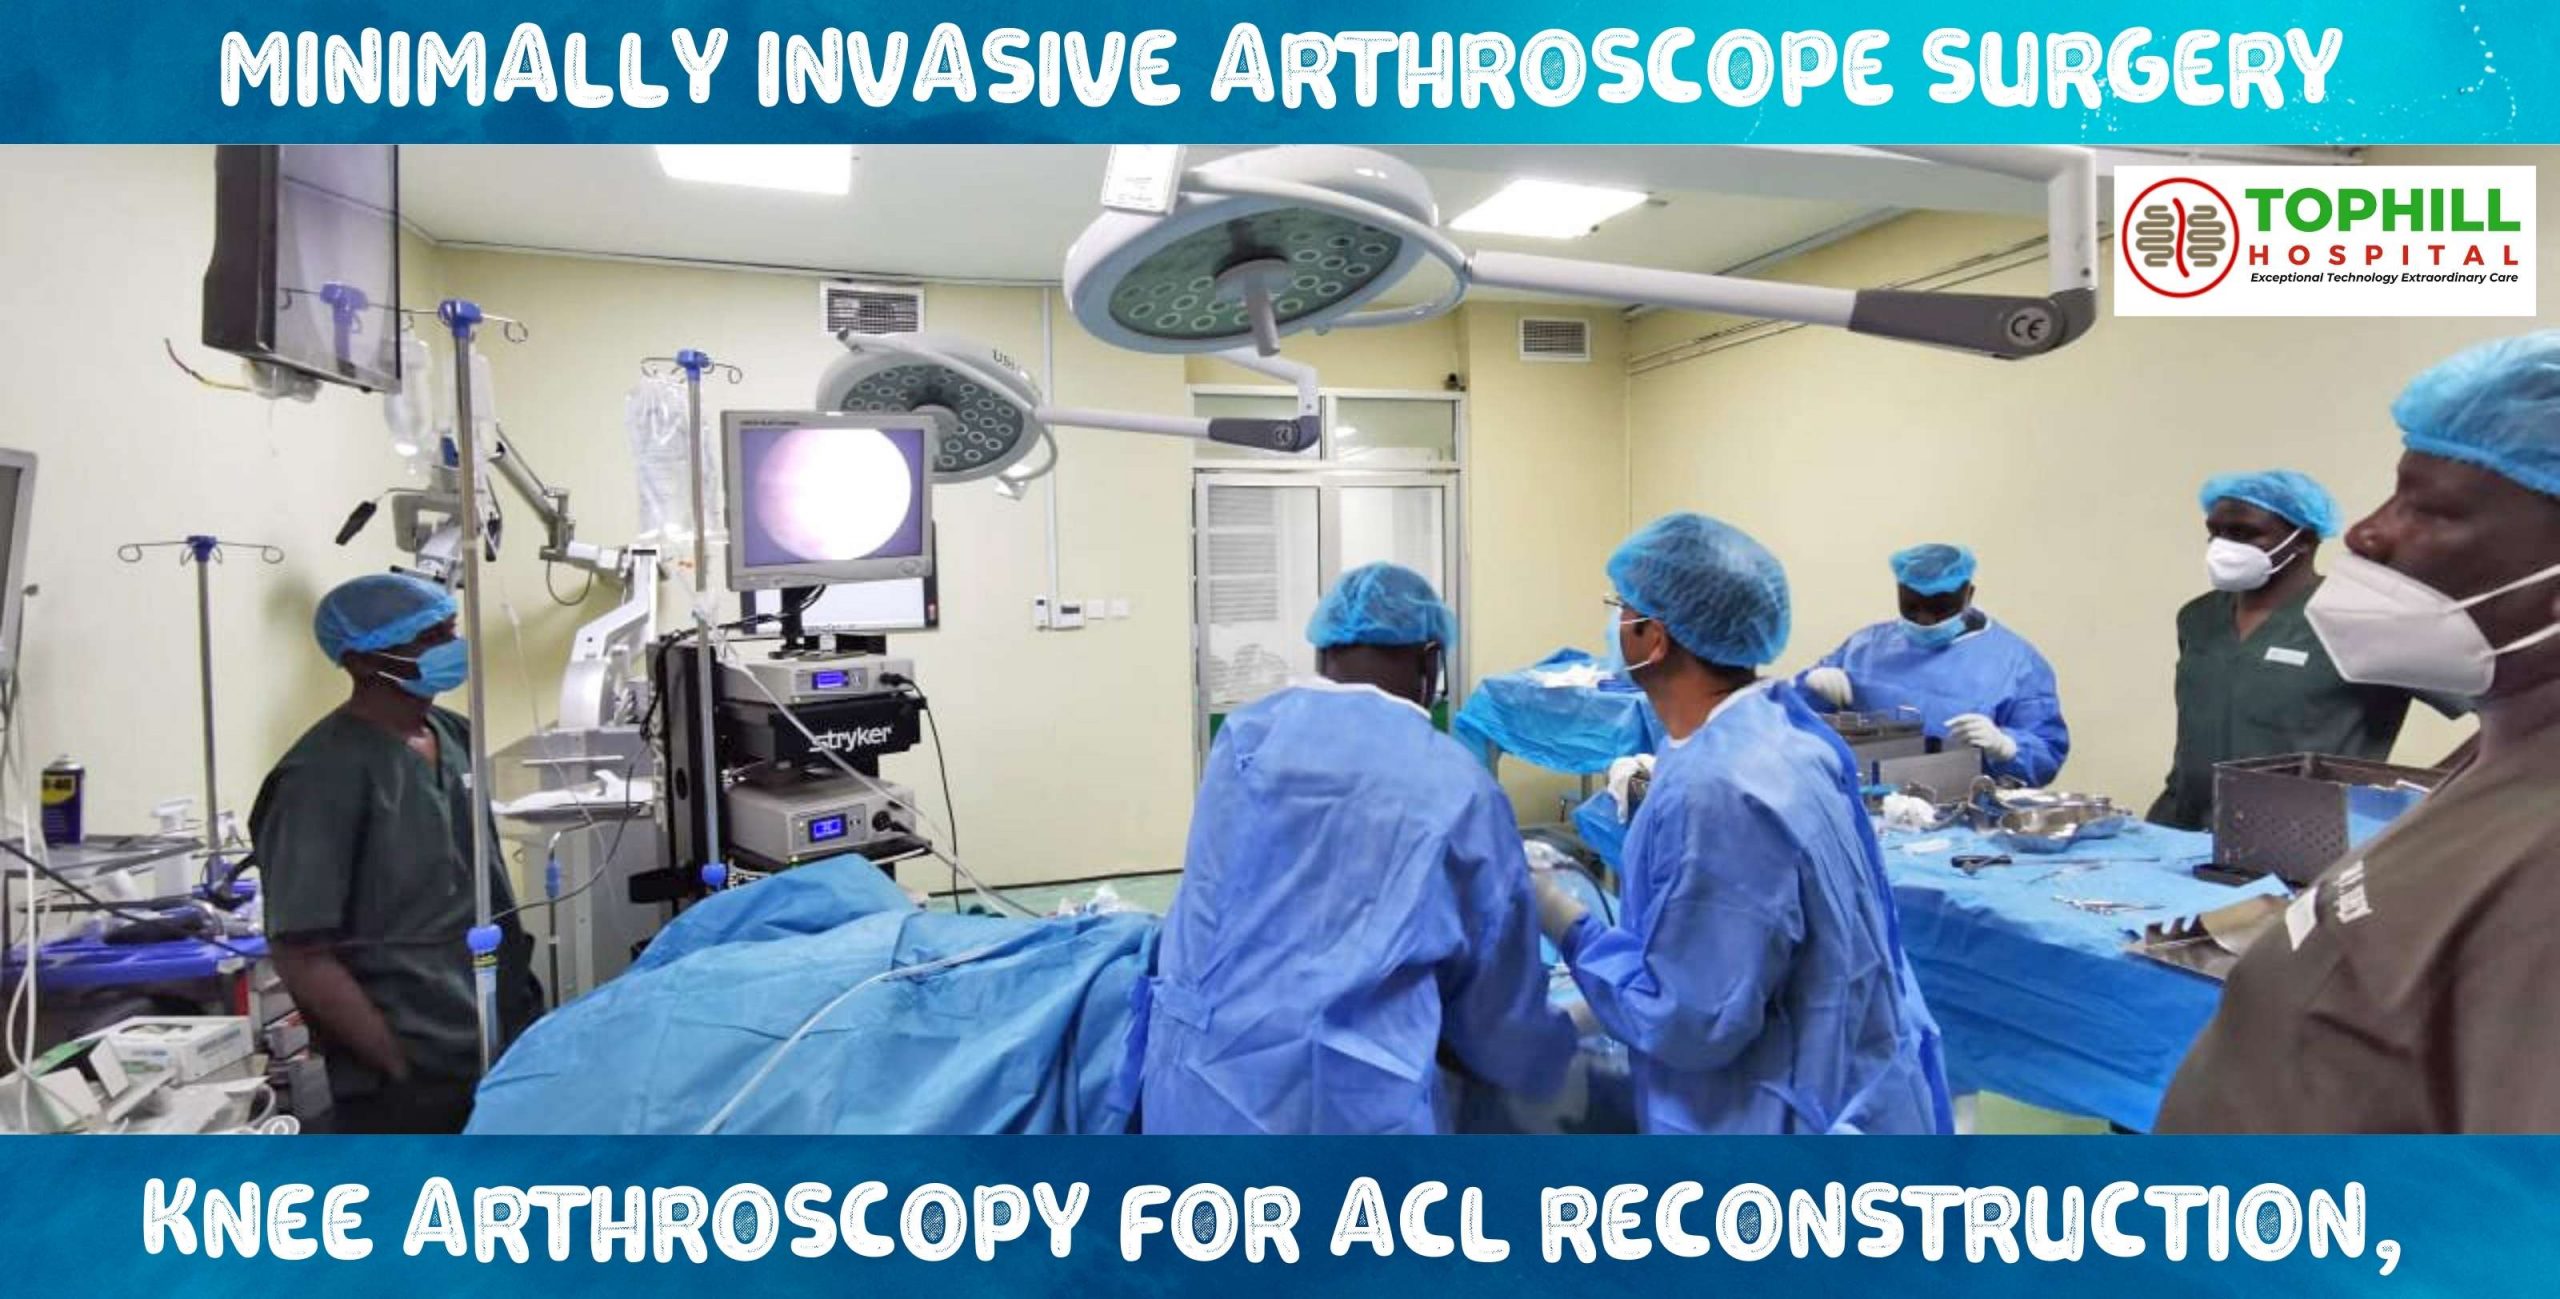 Arthroscope Surgery for the ACL, Meniscus at Tophill Hospital. Minimally Invasive Knee Arthroscopy for ACL Reconstruction, Meniscal Repair, and Other Knee Problems.